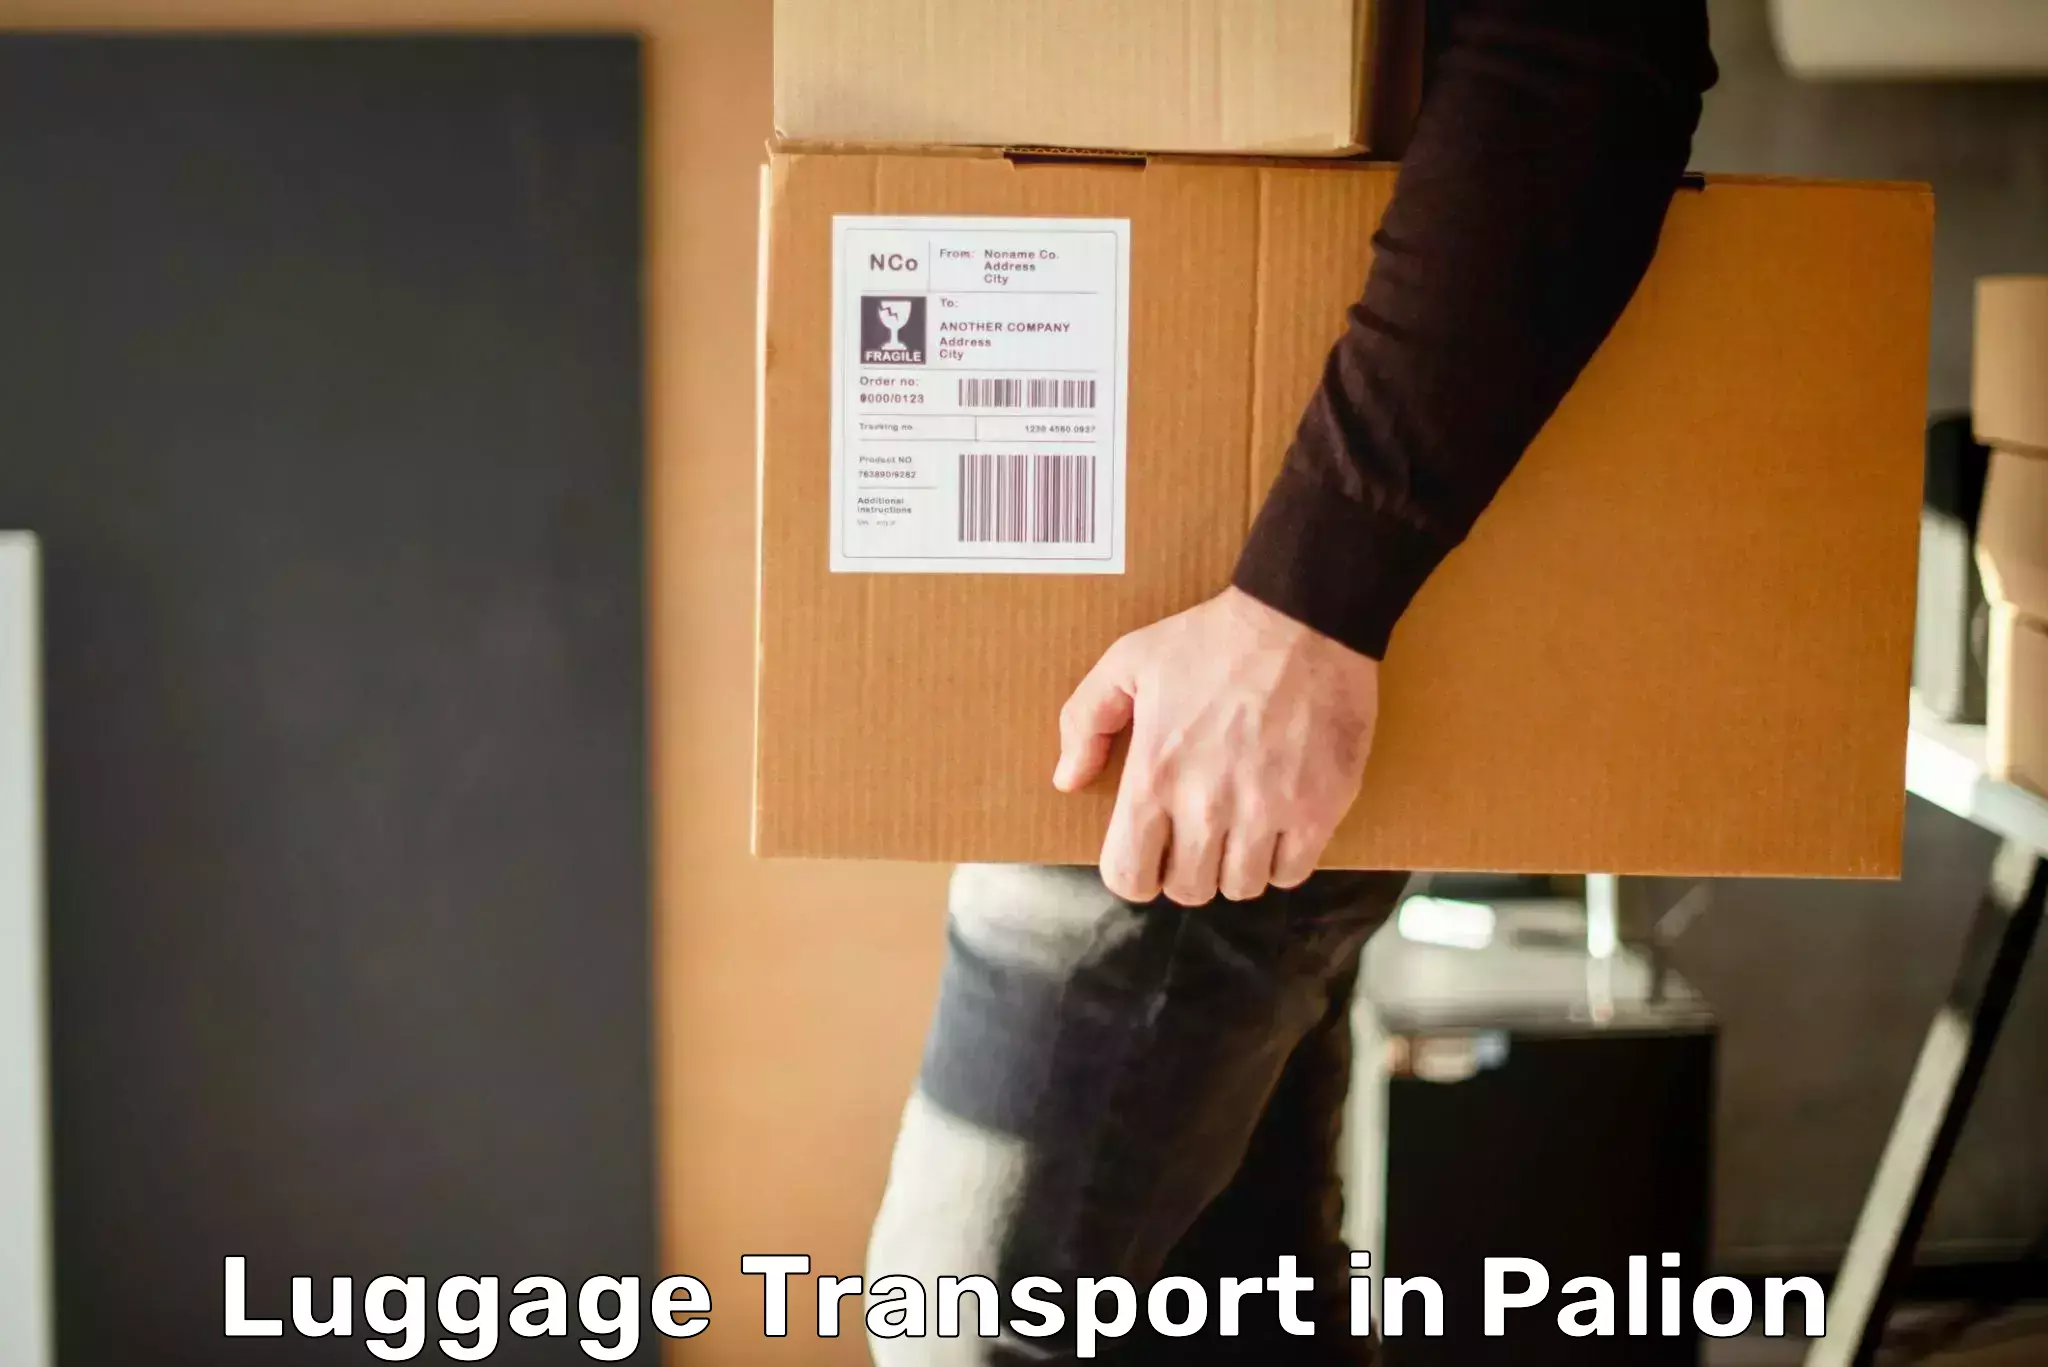 Luggage transport deals in Palion